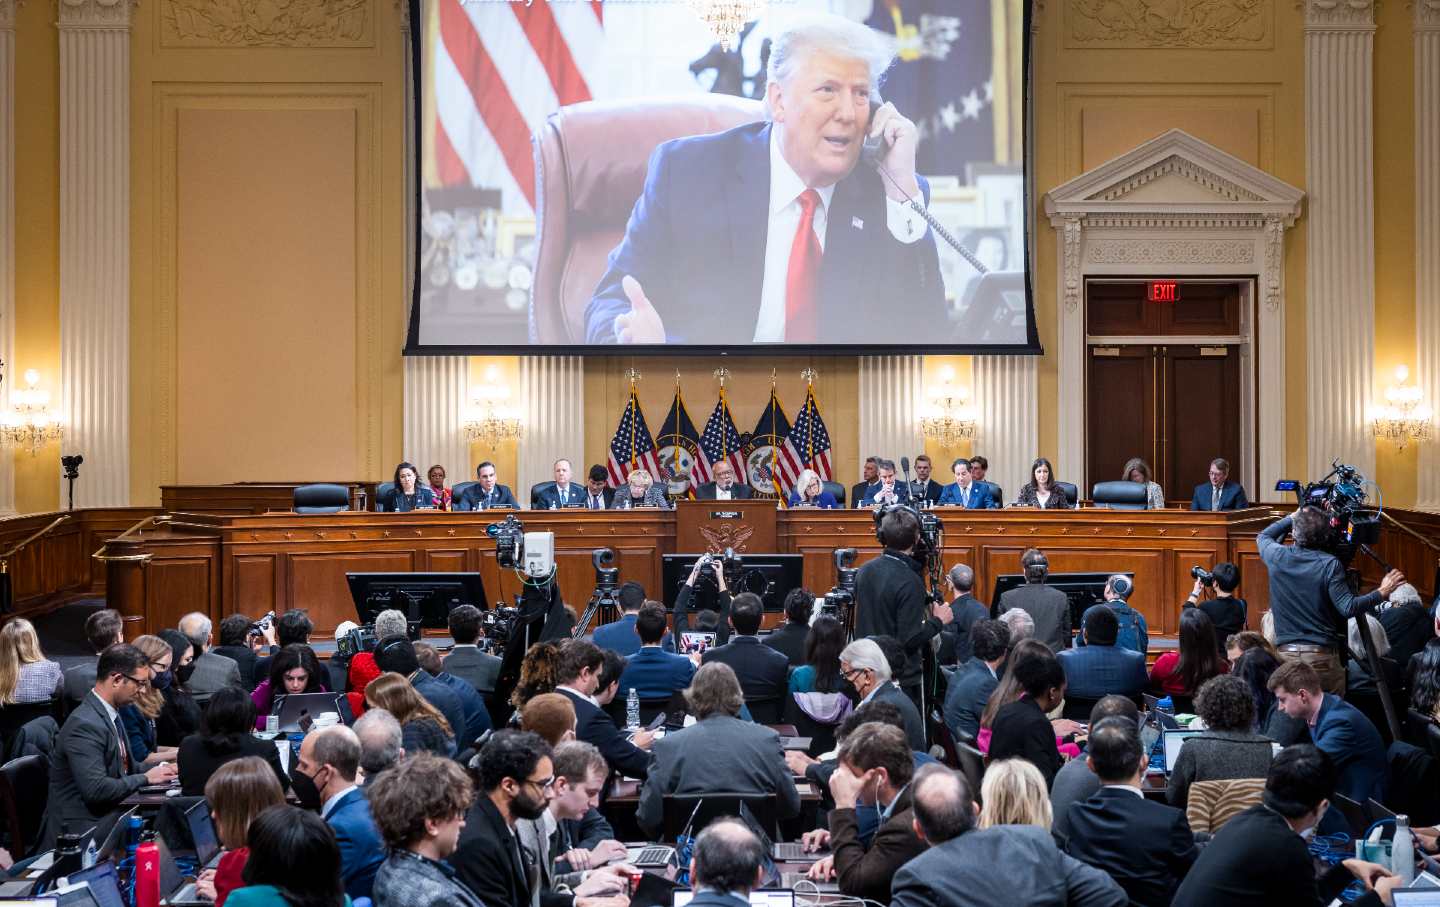 Trump on a screen during the January 6 hearings